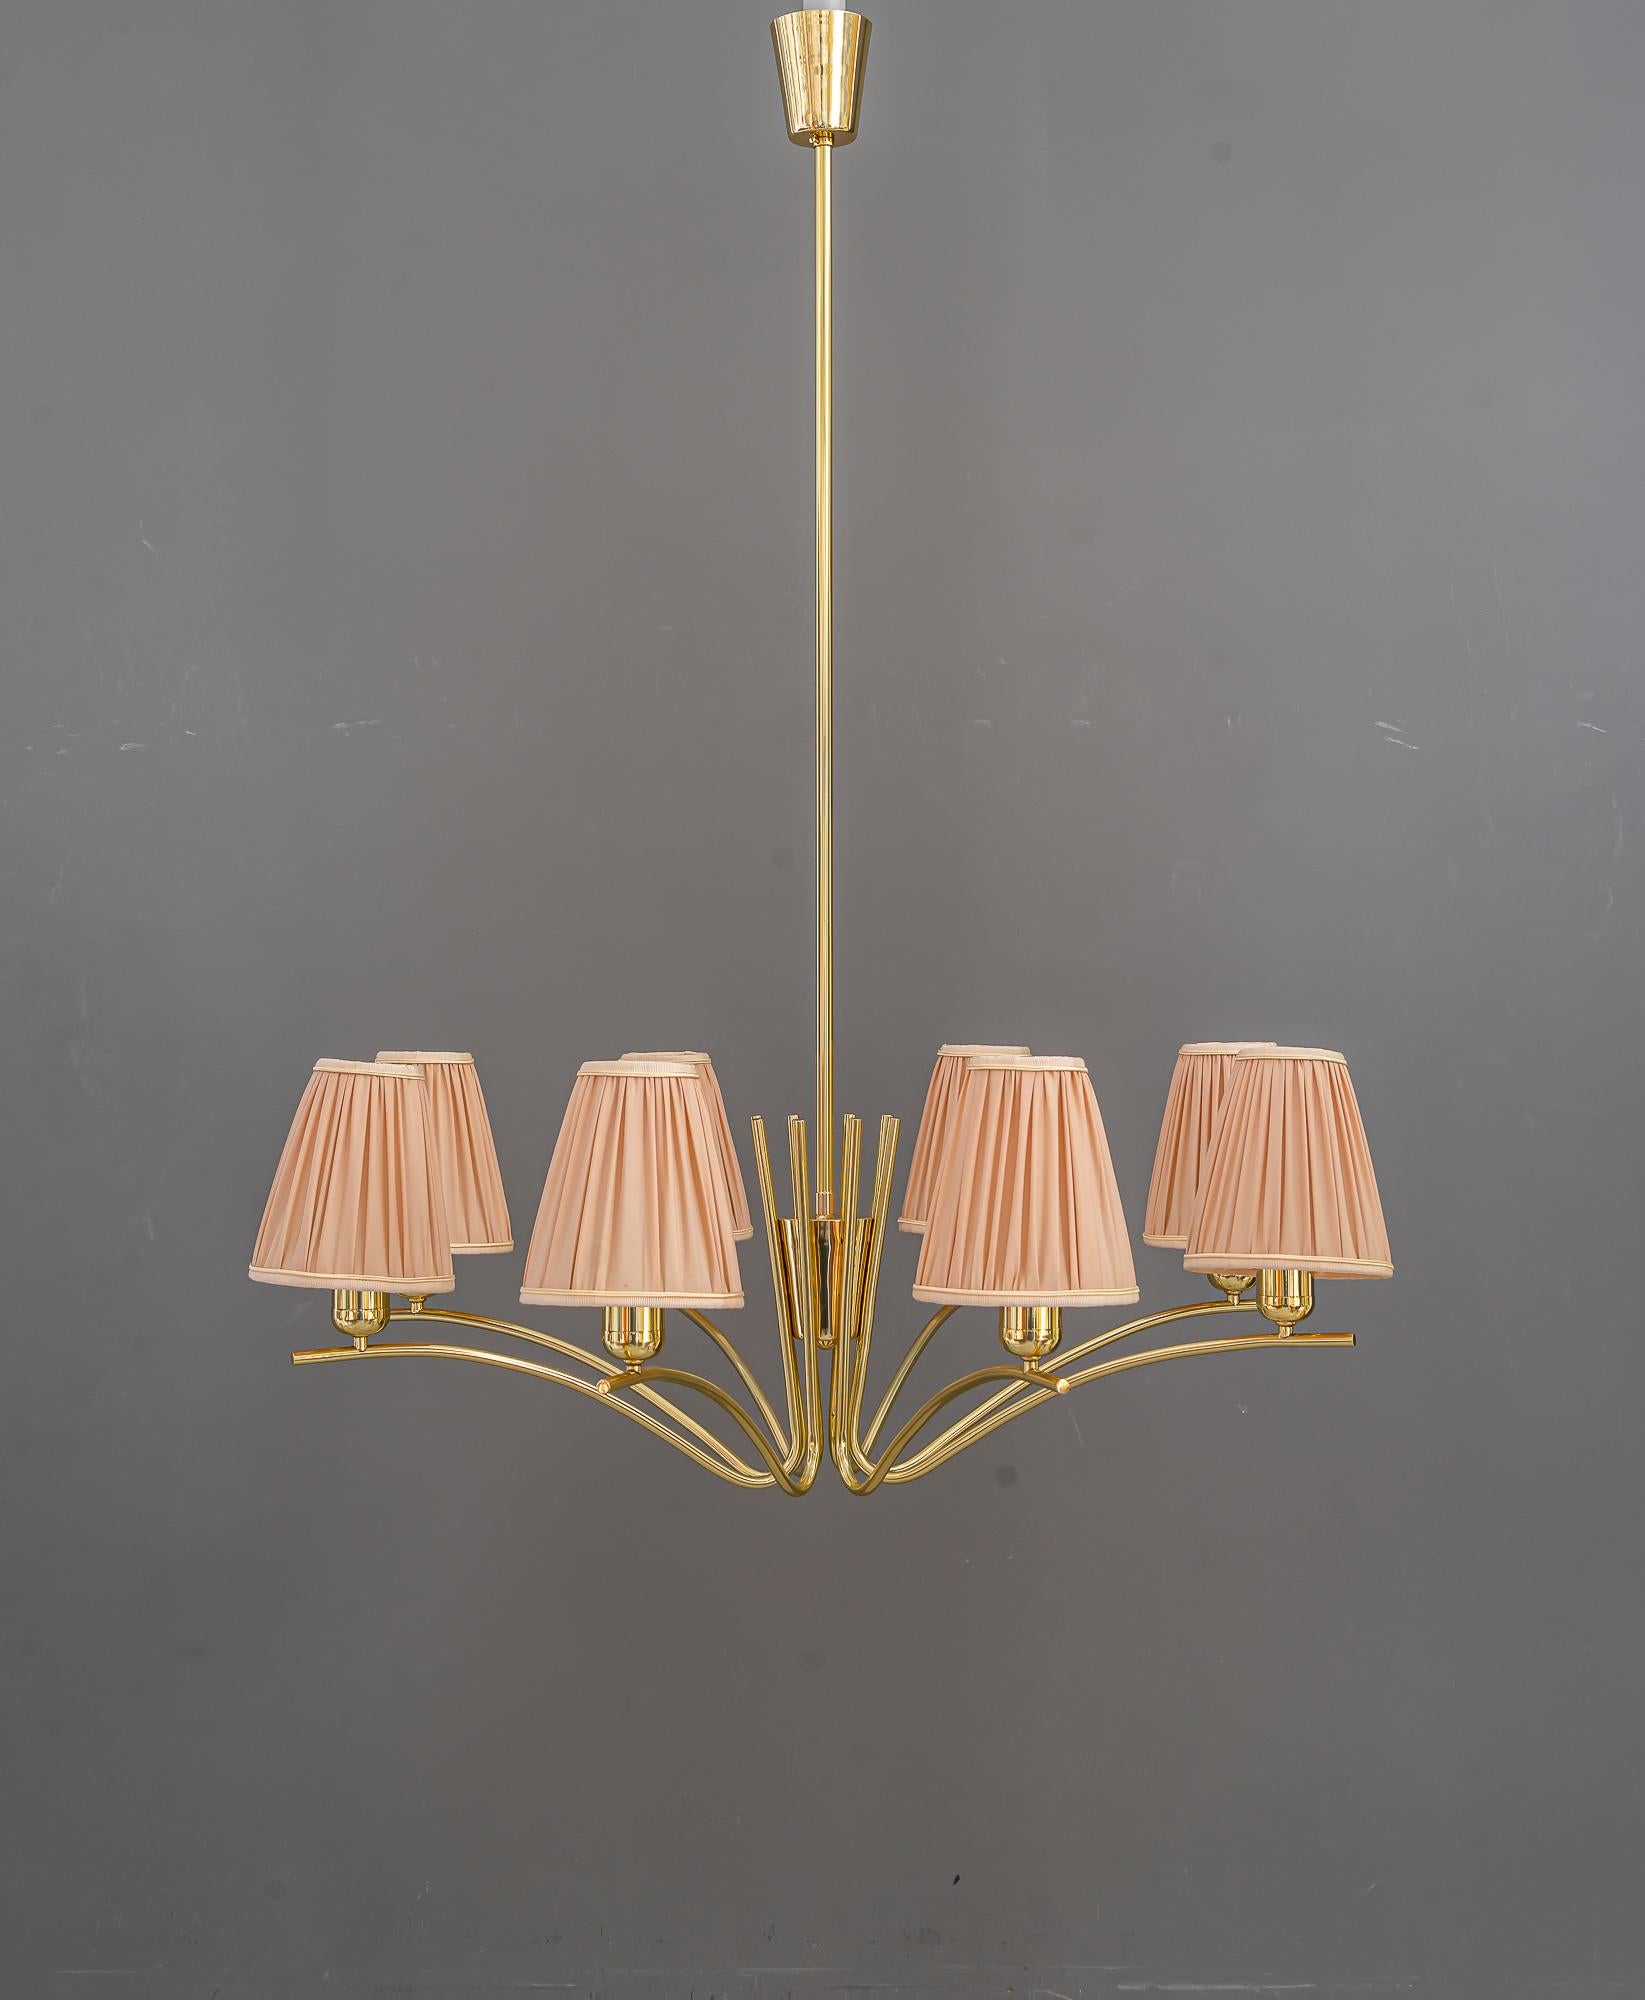 Big Rupert Nikoll chandelier with fabric shades vienna arond 1960s 
Brass polished and stove enameled
The fabric shades are replaced ( new ).